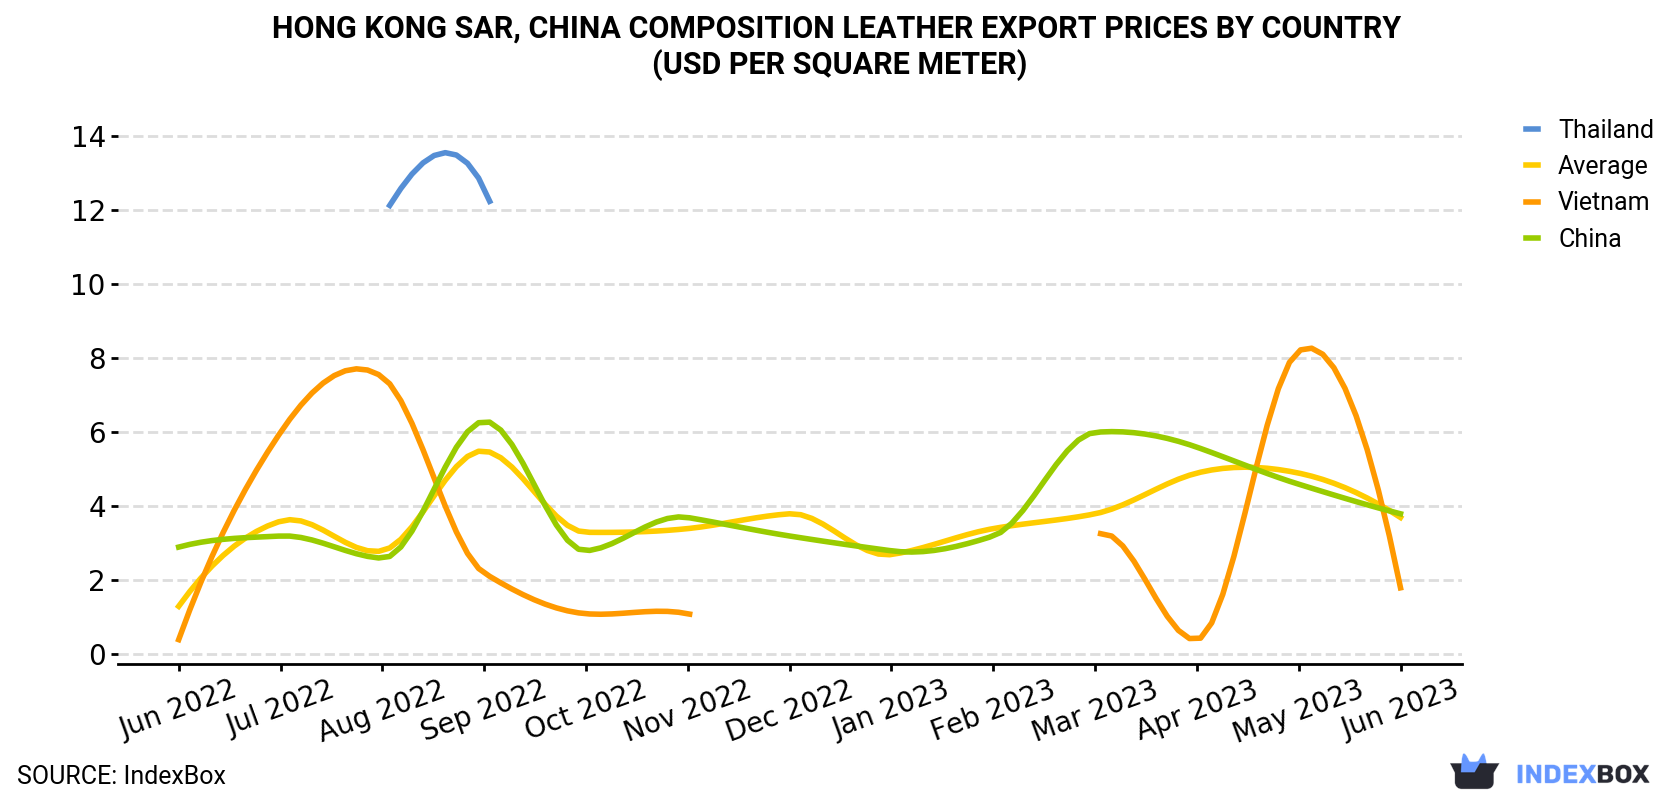 Hong Kong Composition Leather Export Prices By Country (USD Per Square Meter)